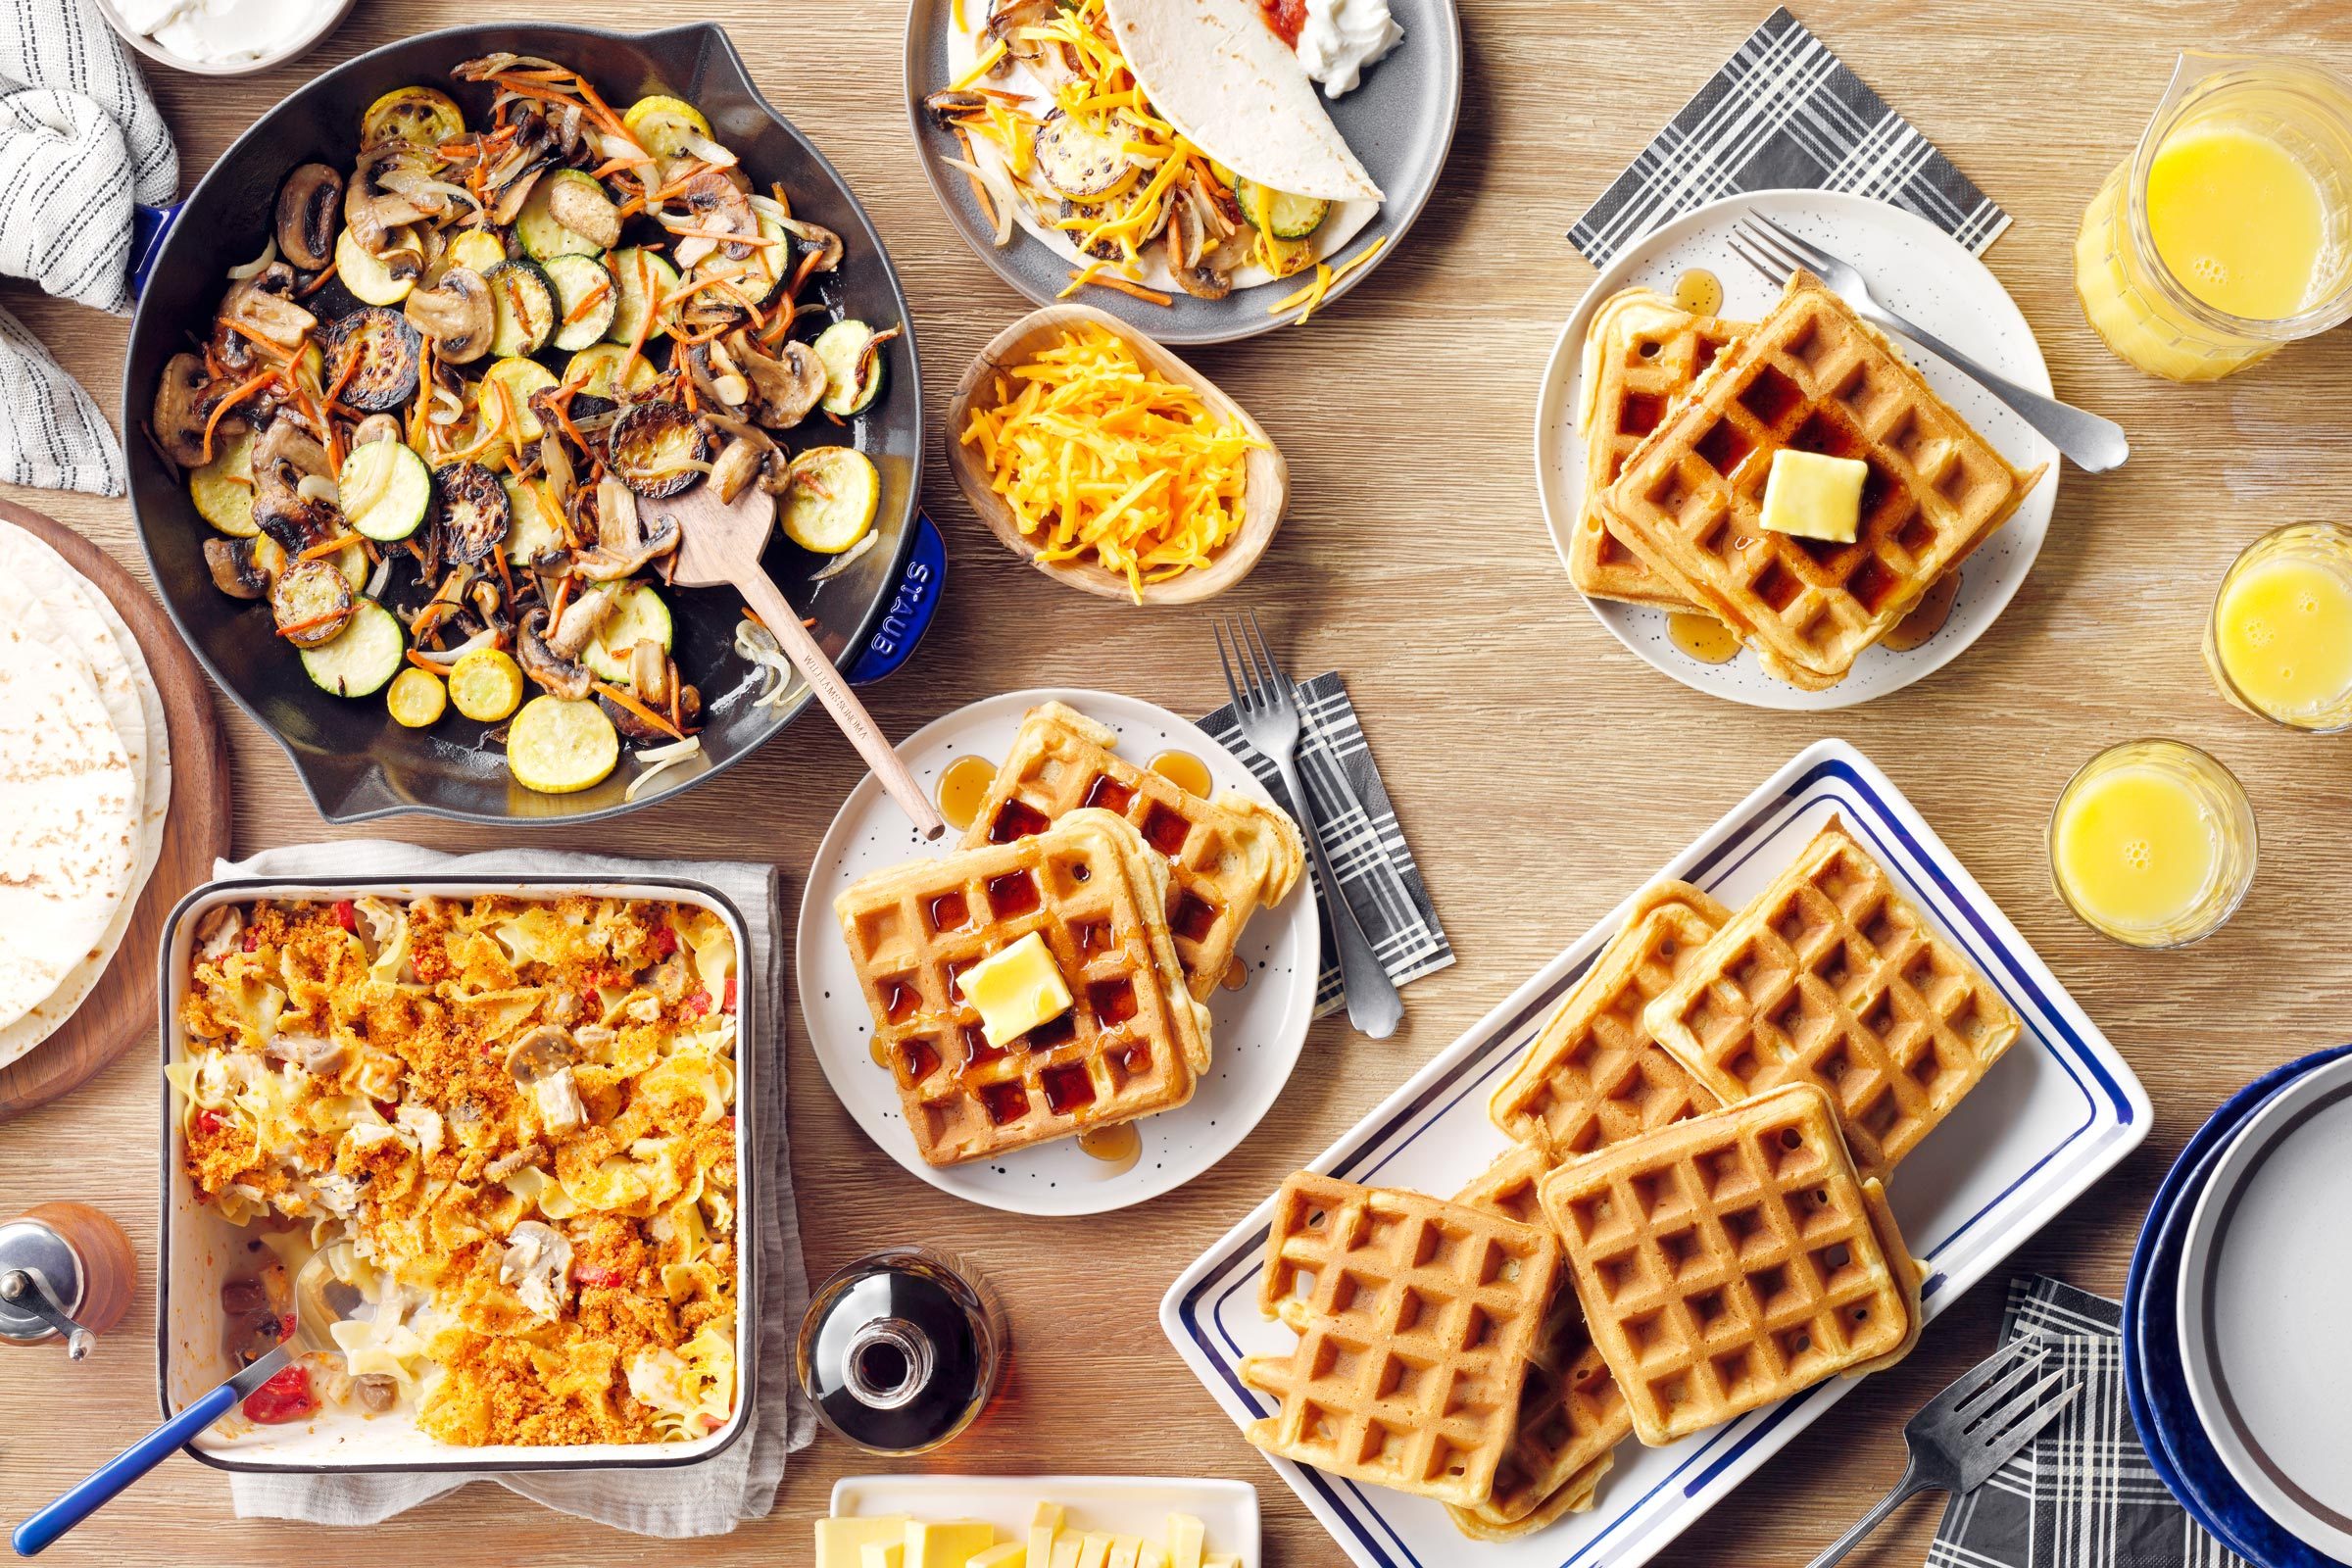 meal prep dishes on plates and baking pans including waffles, a 